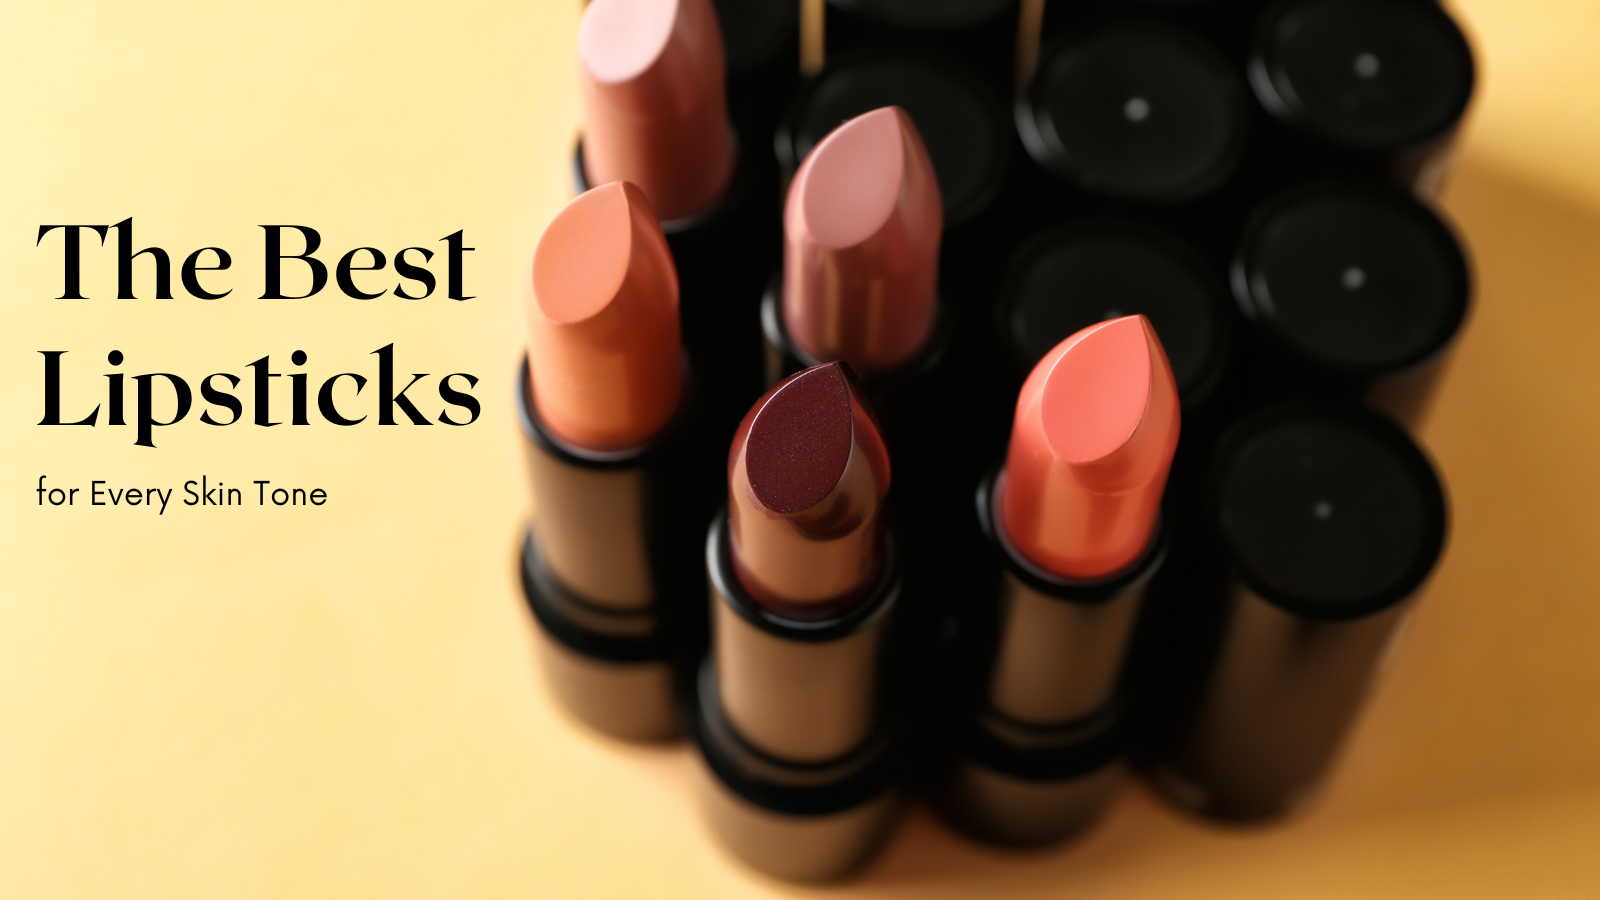 The Best Lipsticks for Every Skin Tone